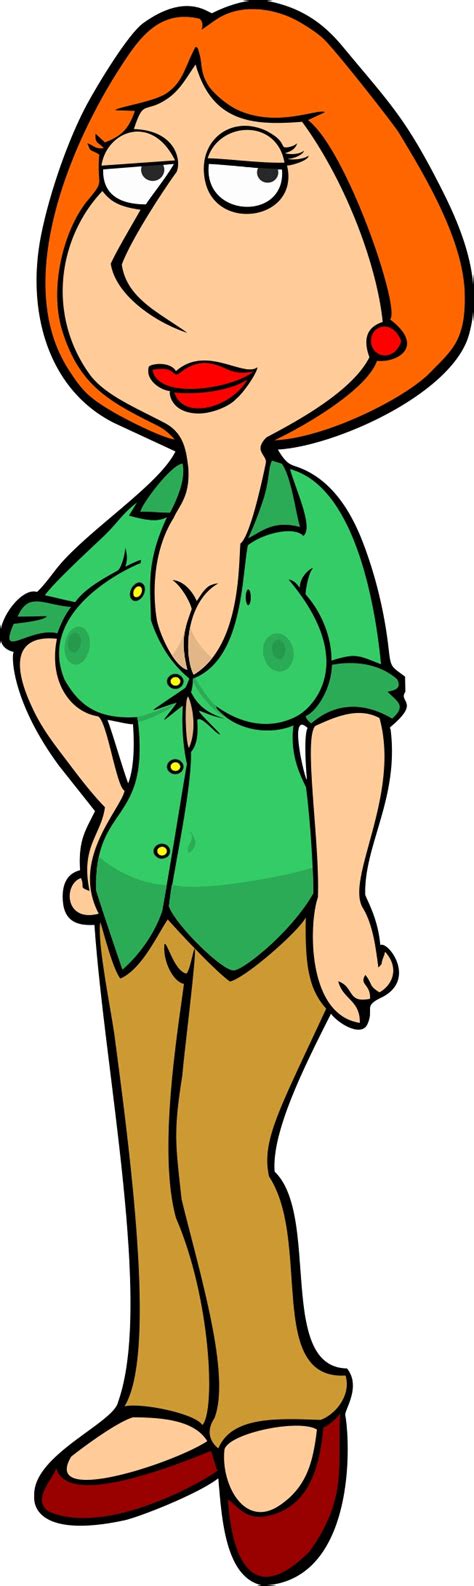 The One And Only Lois By Syl On Deviantart